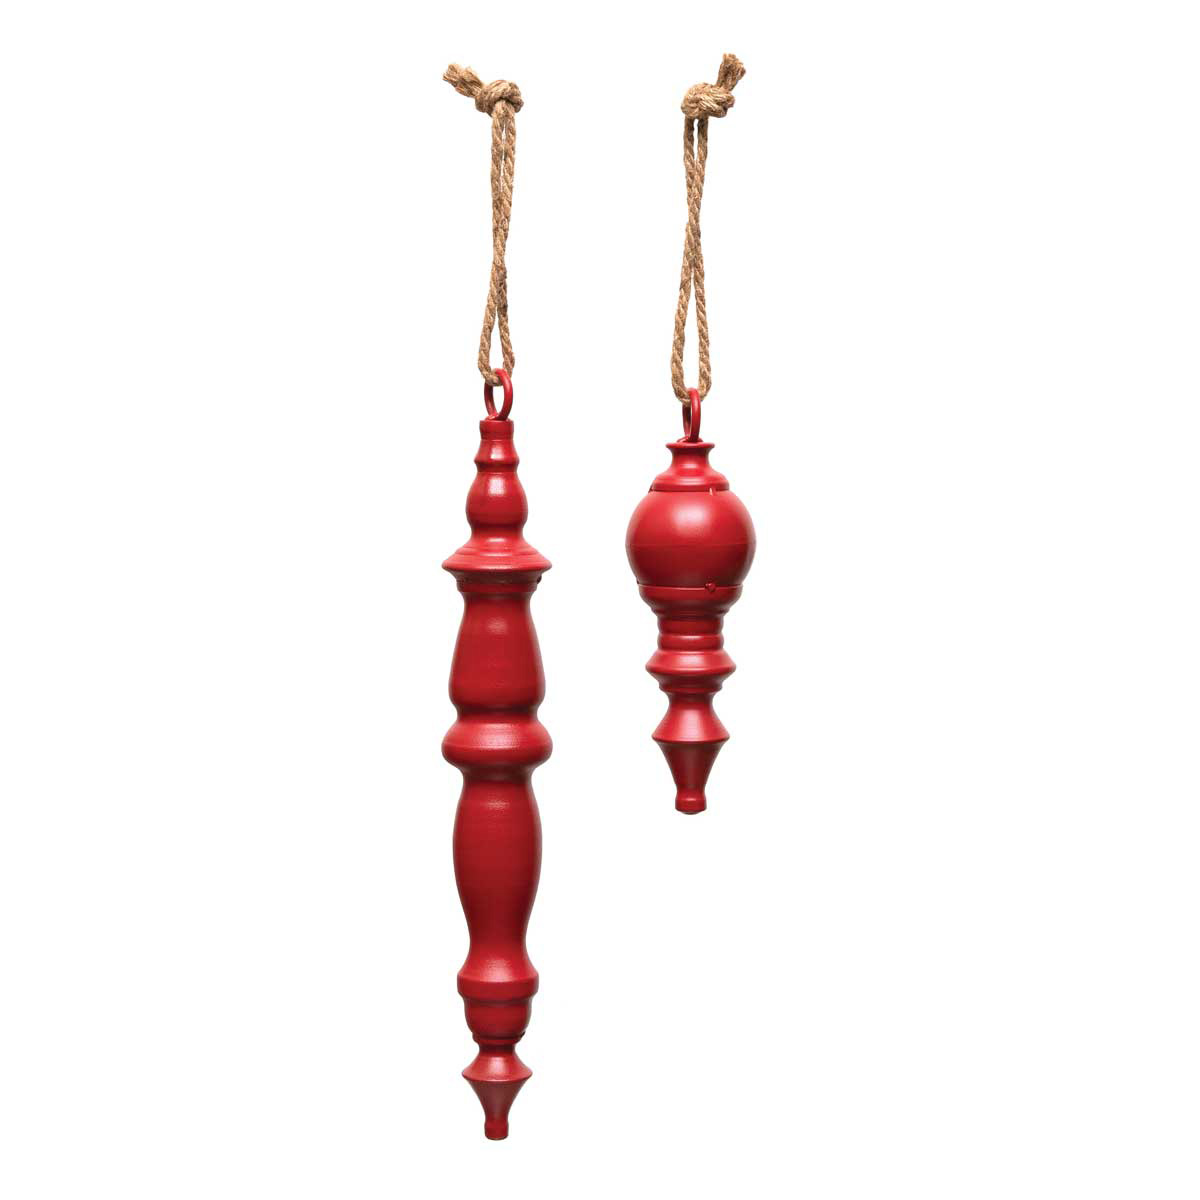 ORNAMENT FINIAL MATTE RED SMALL 2.75IN X 9IN METAL